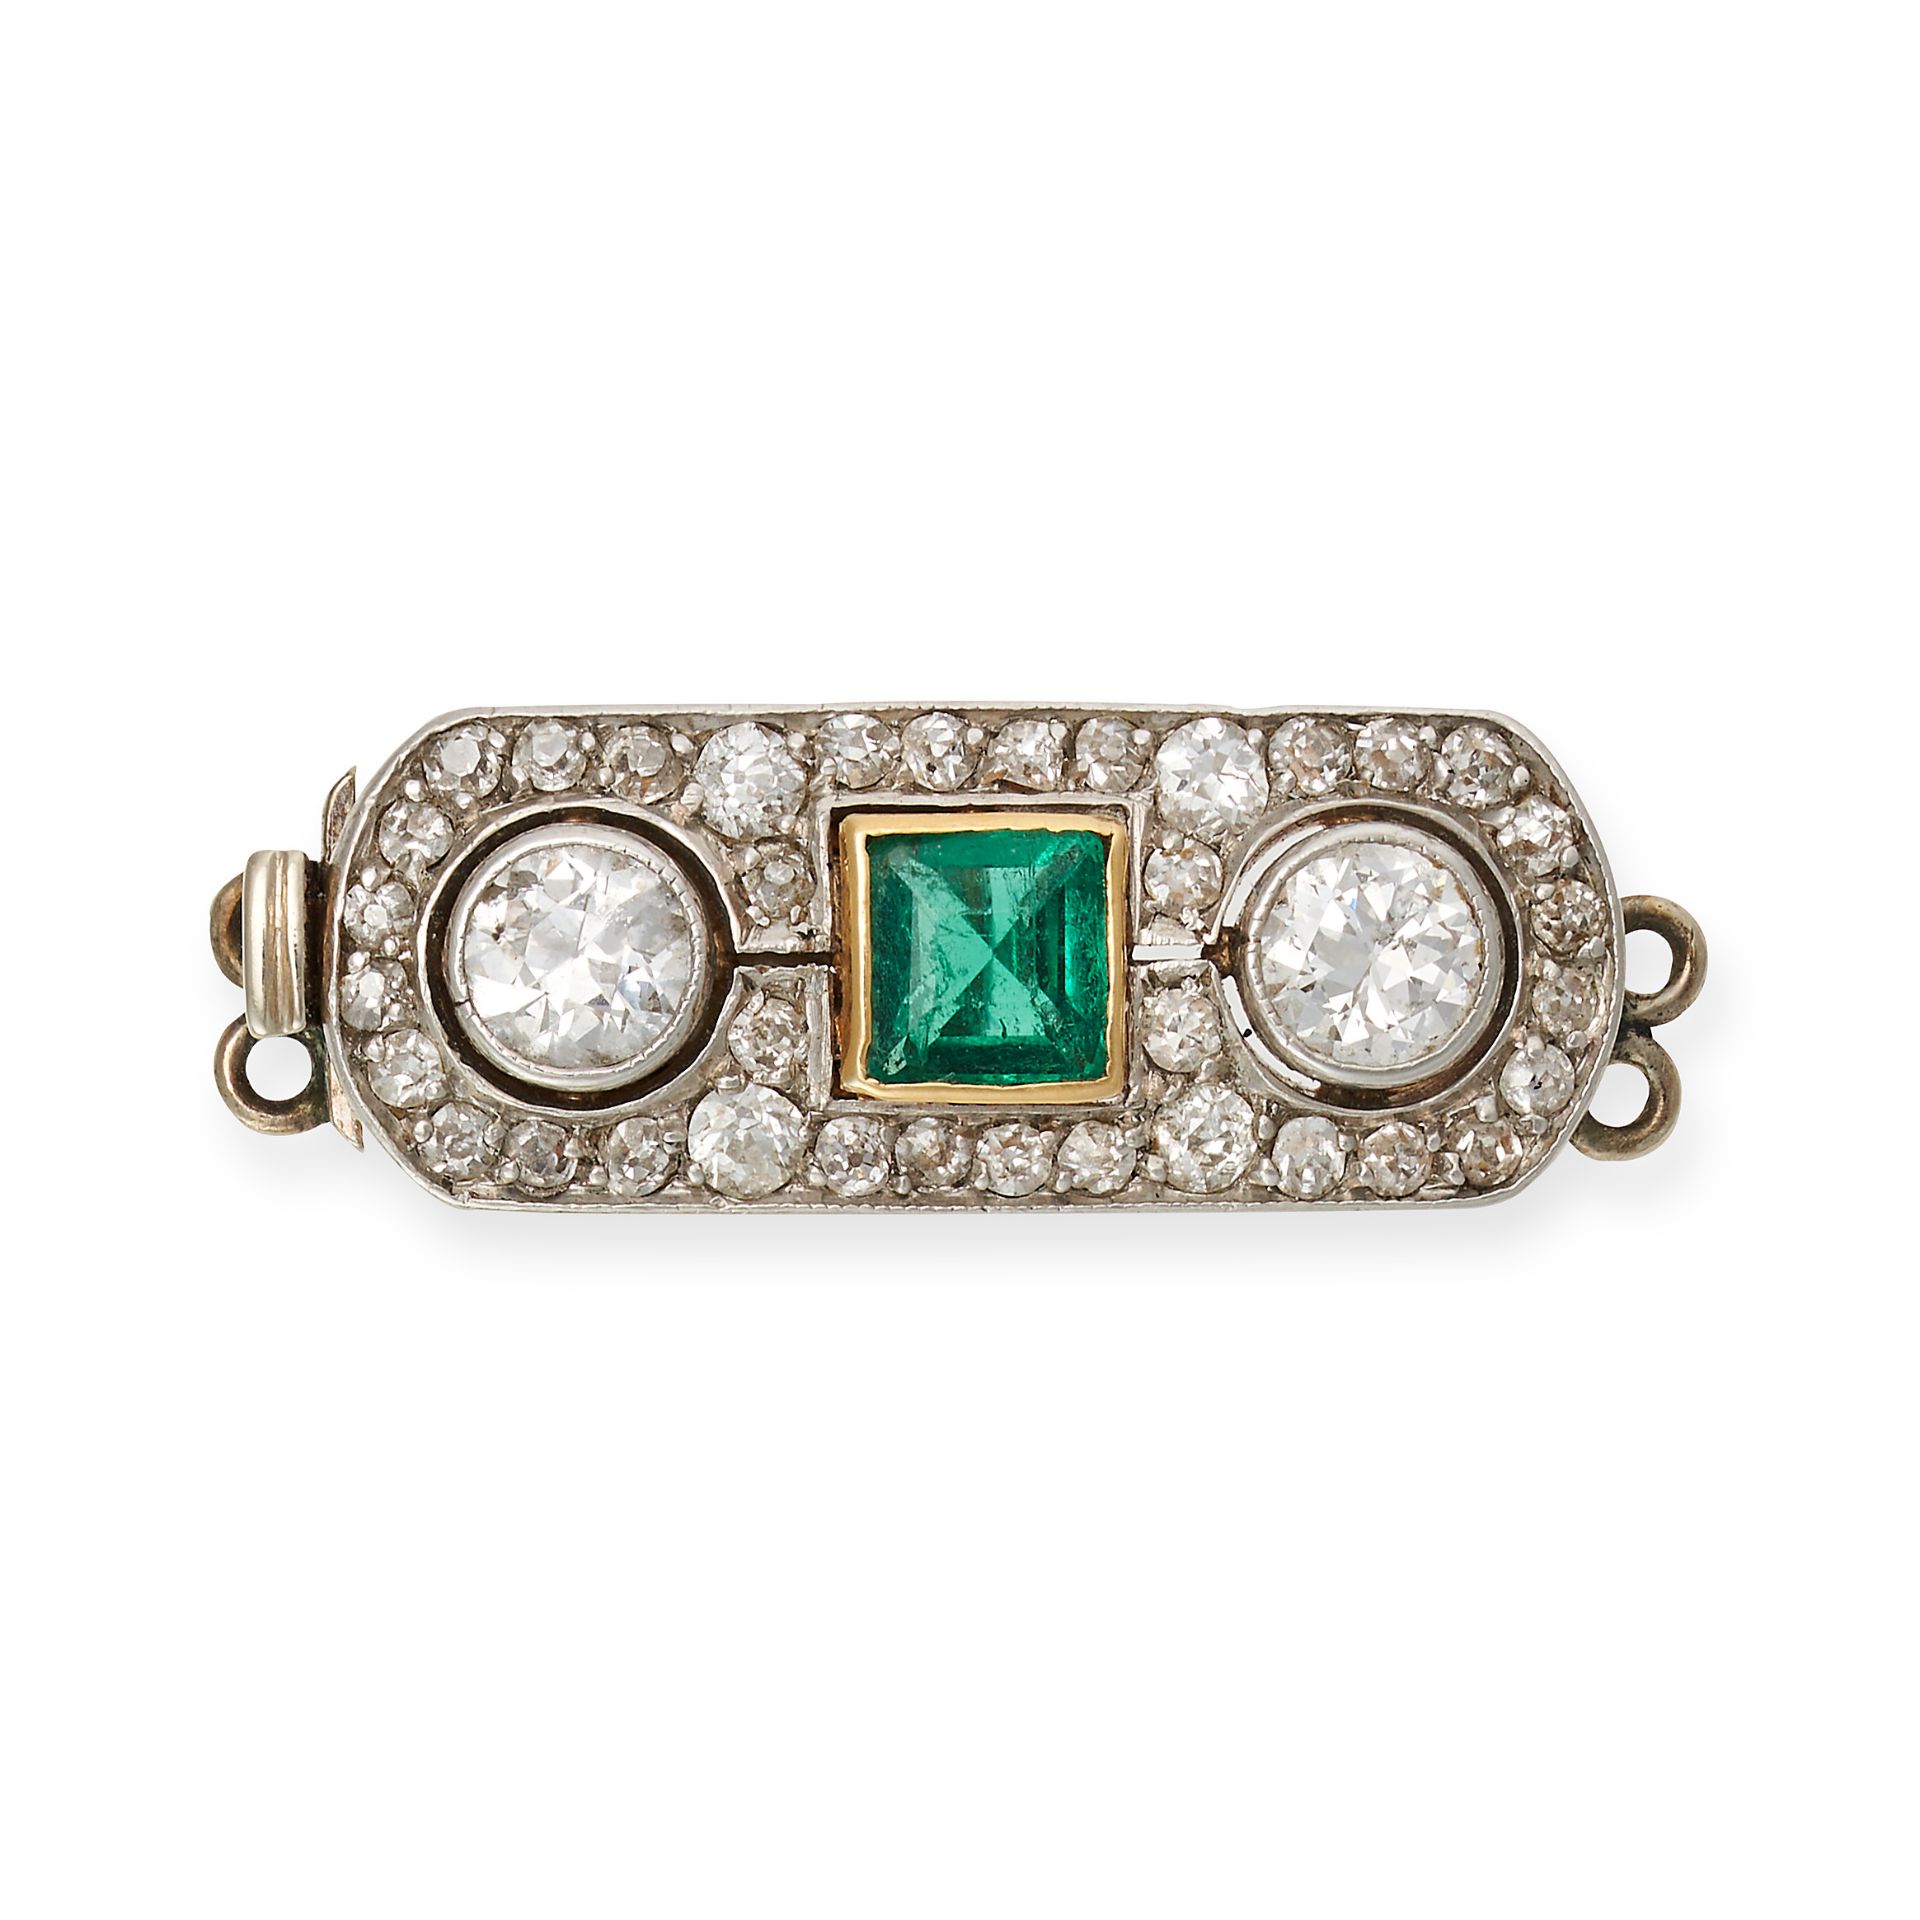 AN ANTIQUE EMERALD AND DIAMOND CLASP in yellow and white gold, set with a square step cut emerald...